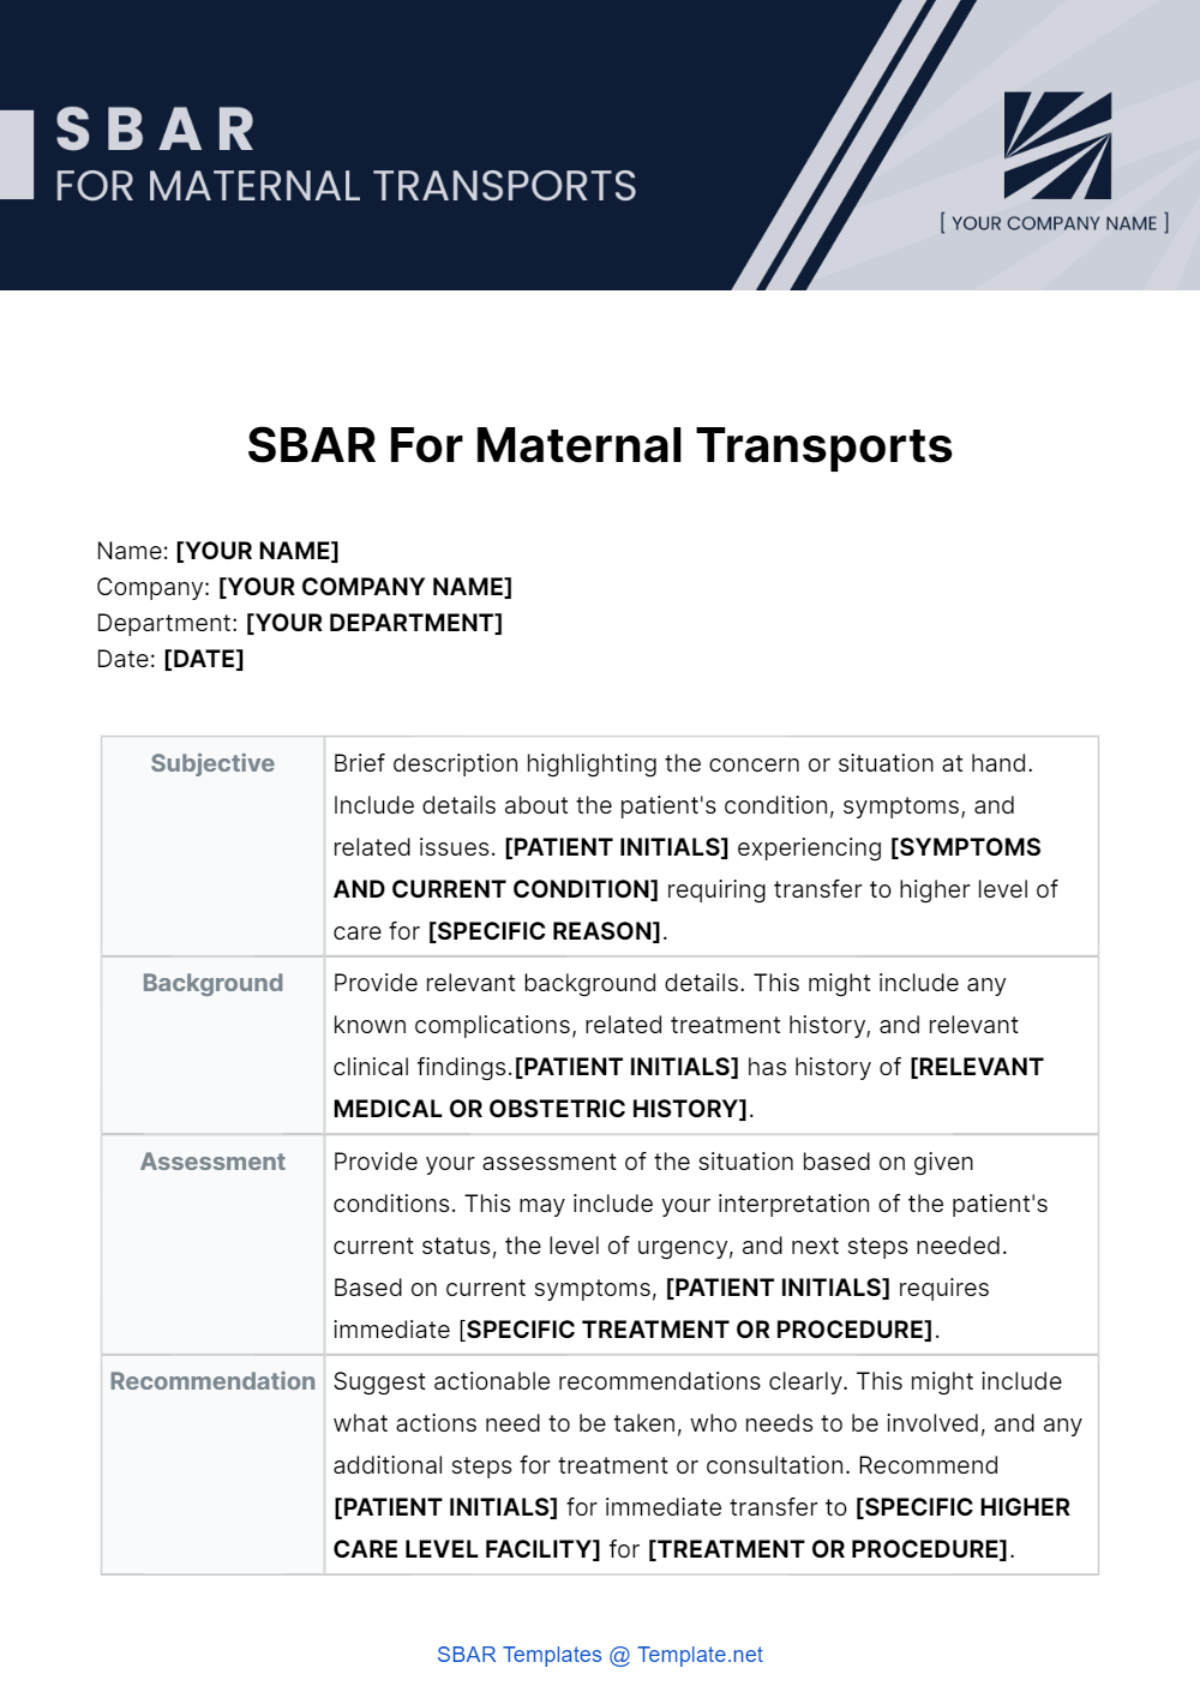 Free SBAR for Maternal Transports Template